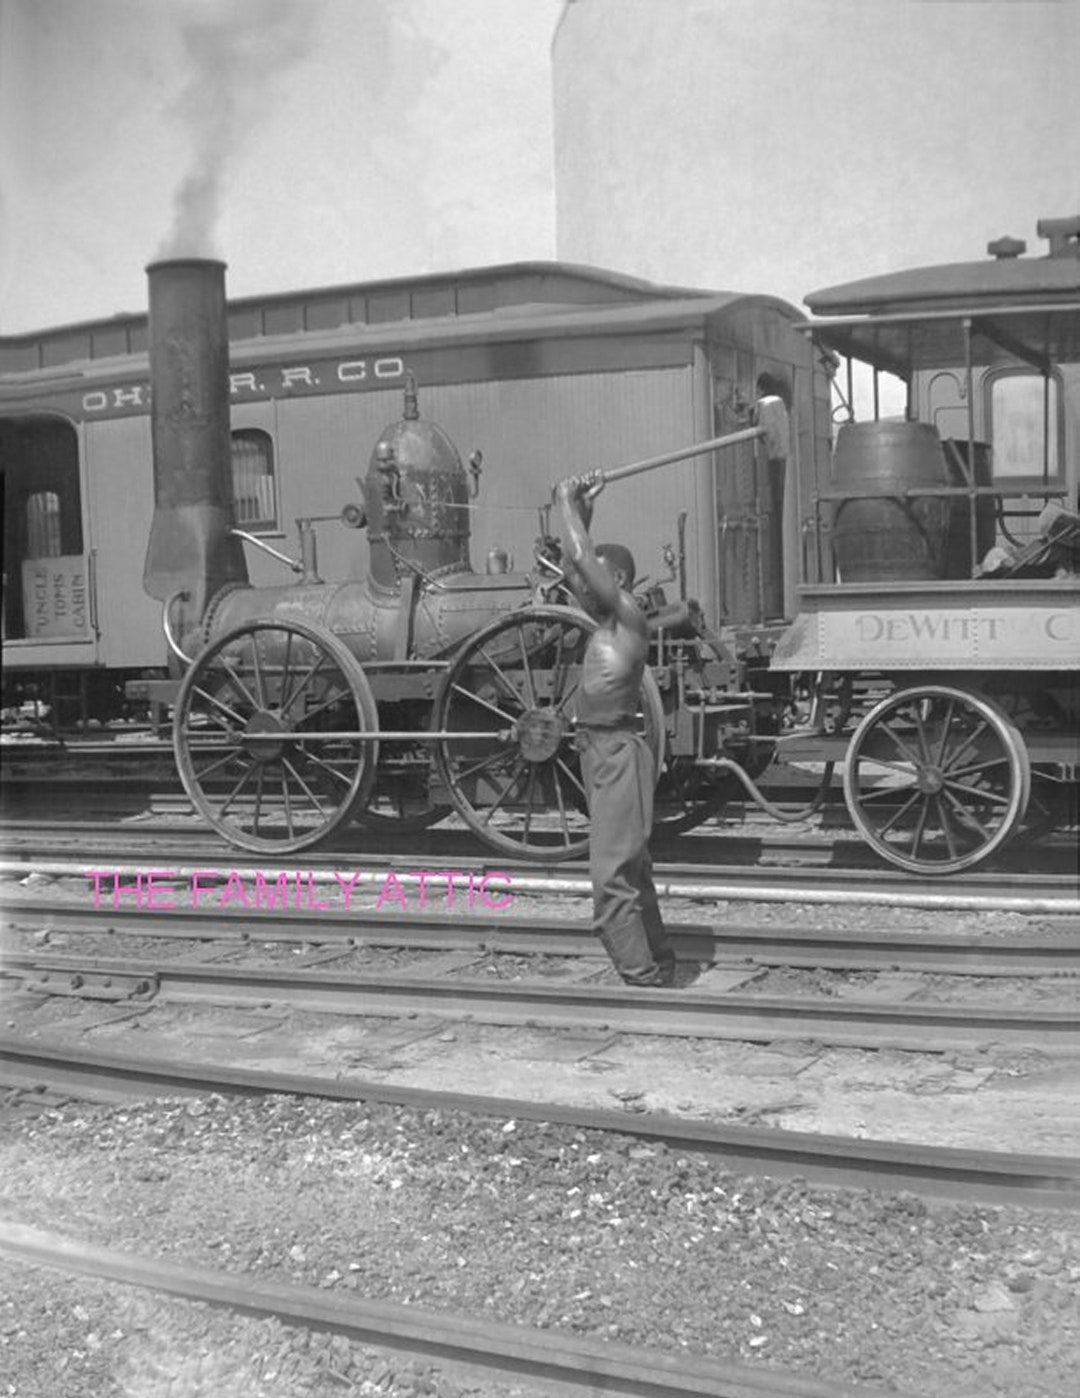 Dewitt Clinton Train Engine NY Central Photo 1940 New York picture